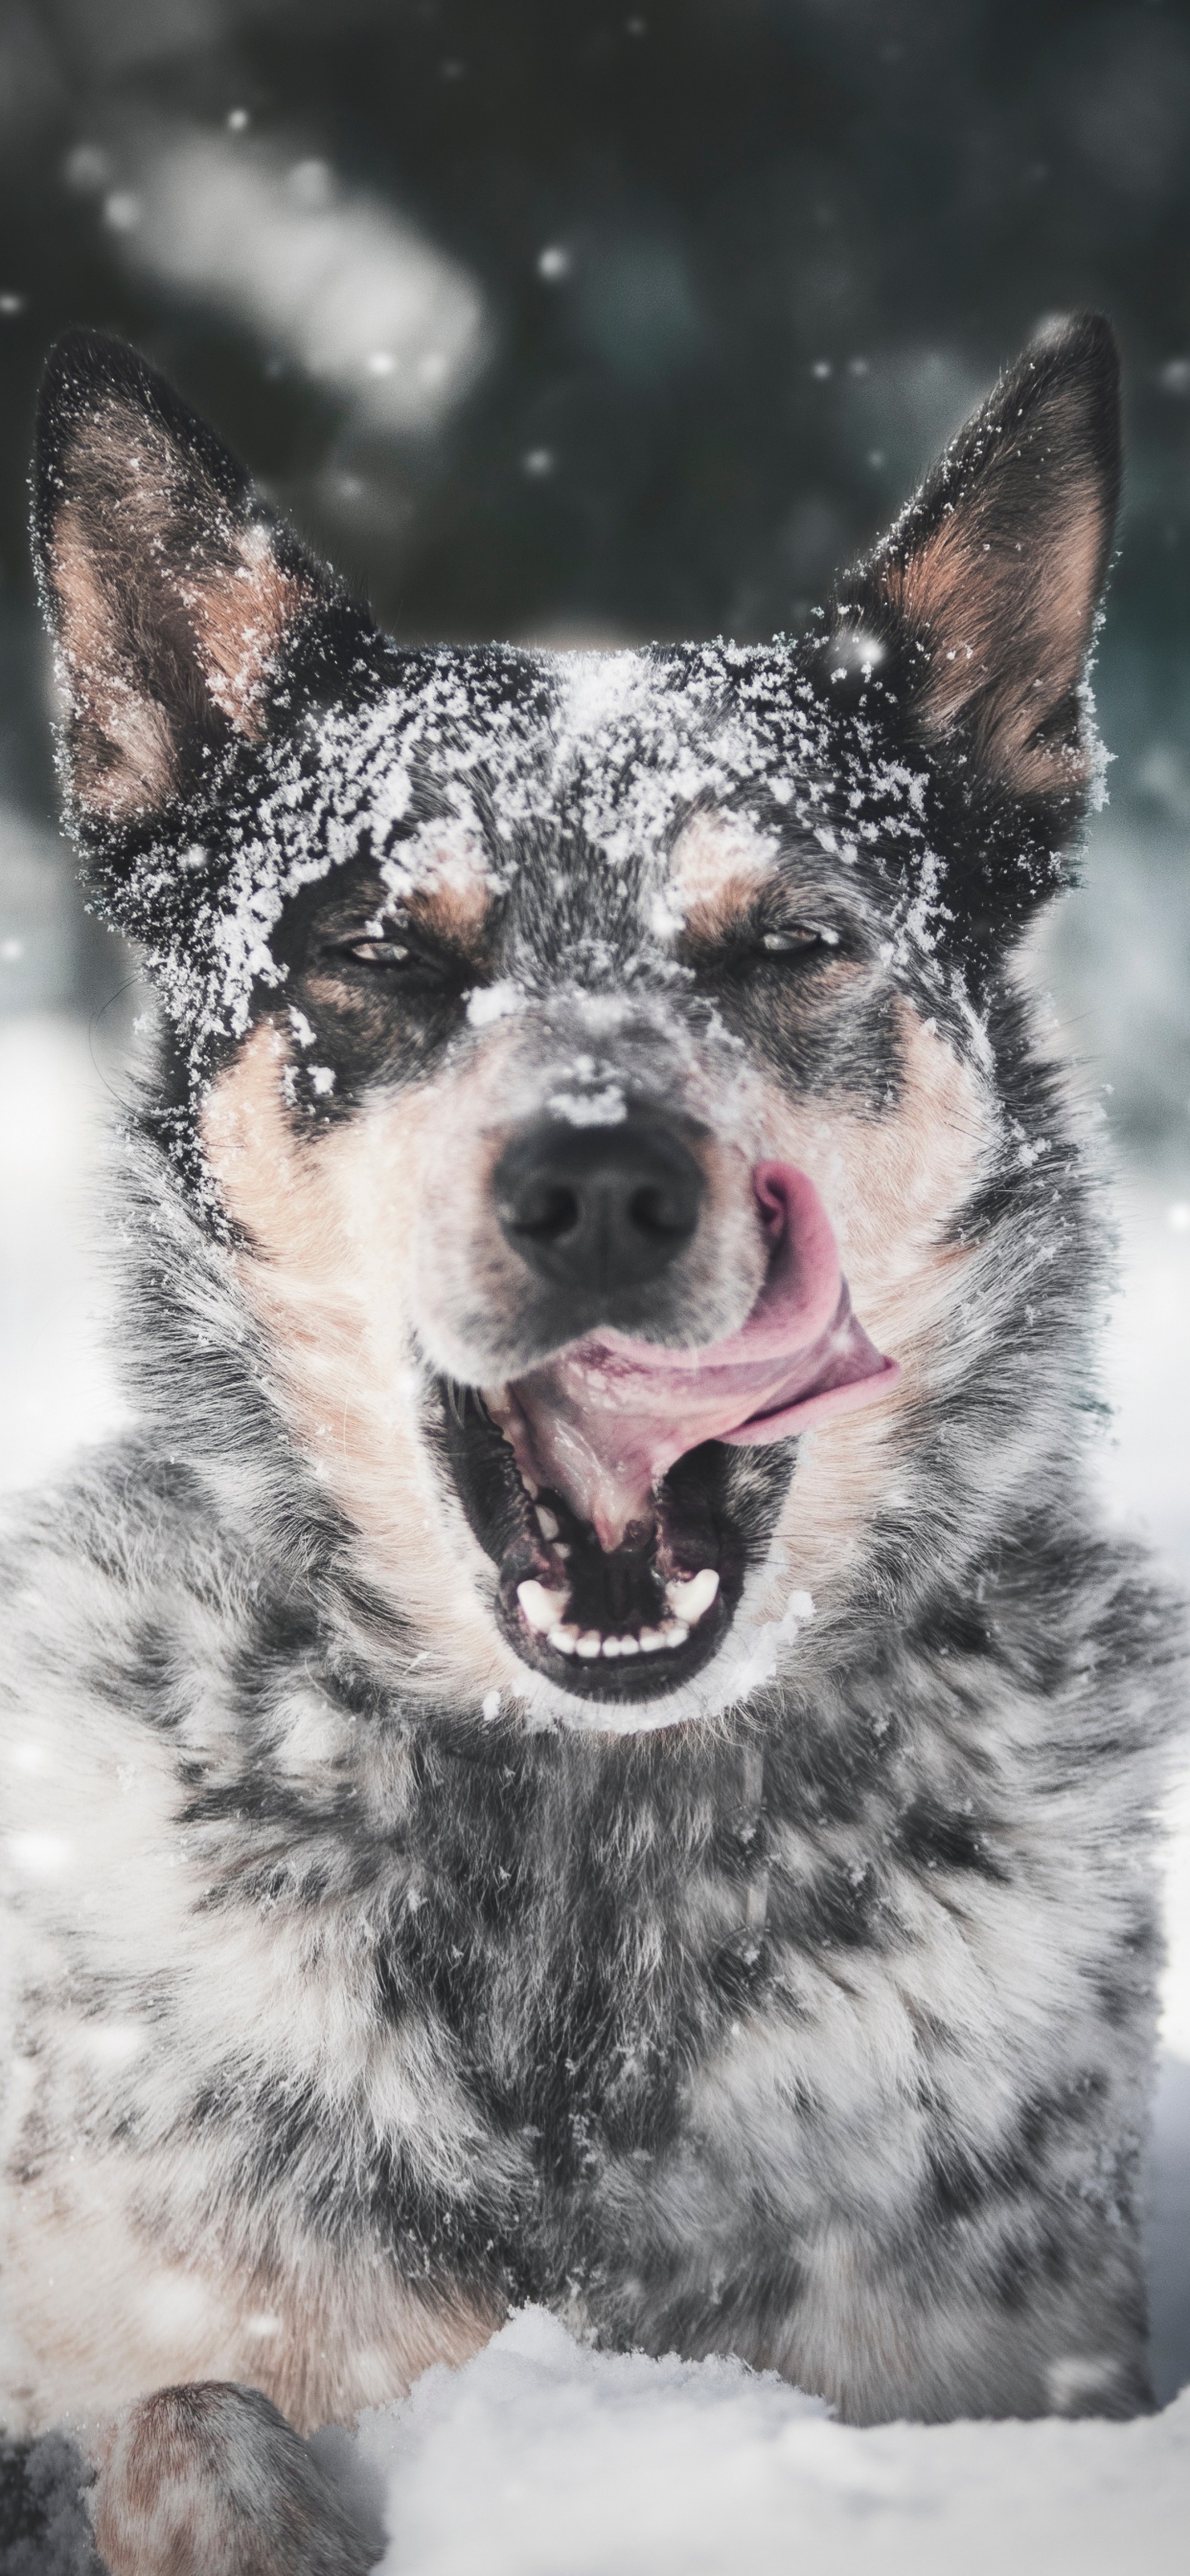 Black and White Short Coated Dog on Snow Covered Ground During Daytime. Wallpaper in 1242x2688 Resolution